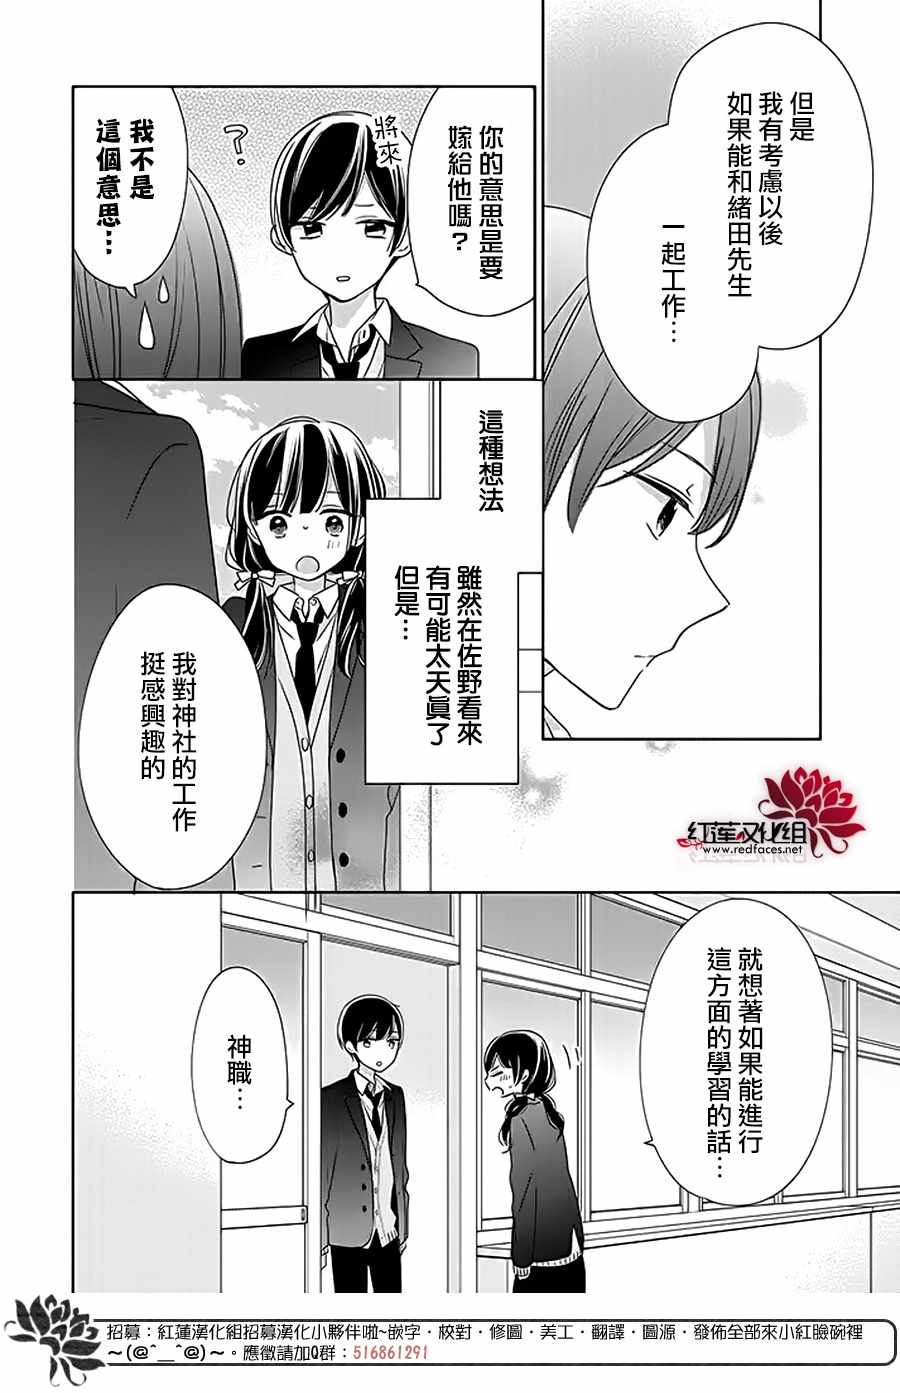 《If given a second chance》漫画 second chance 033集